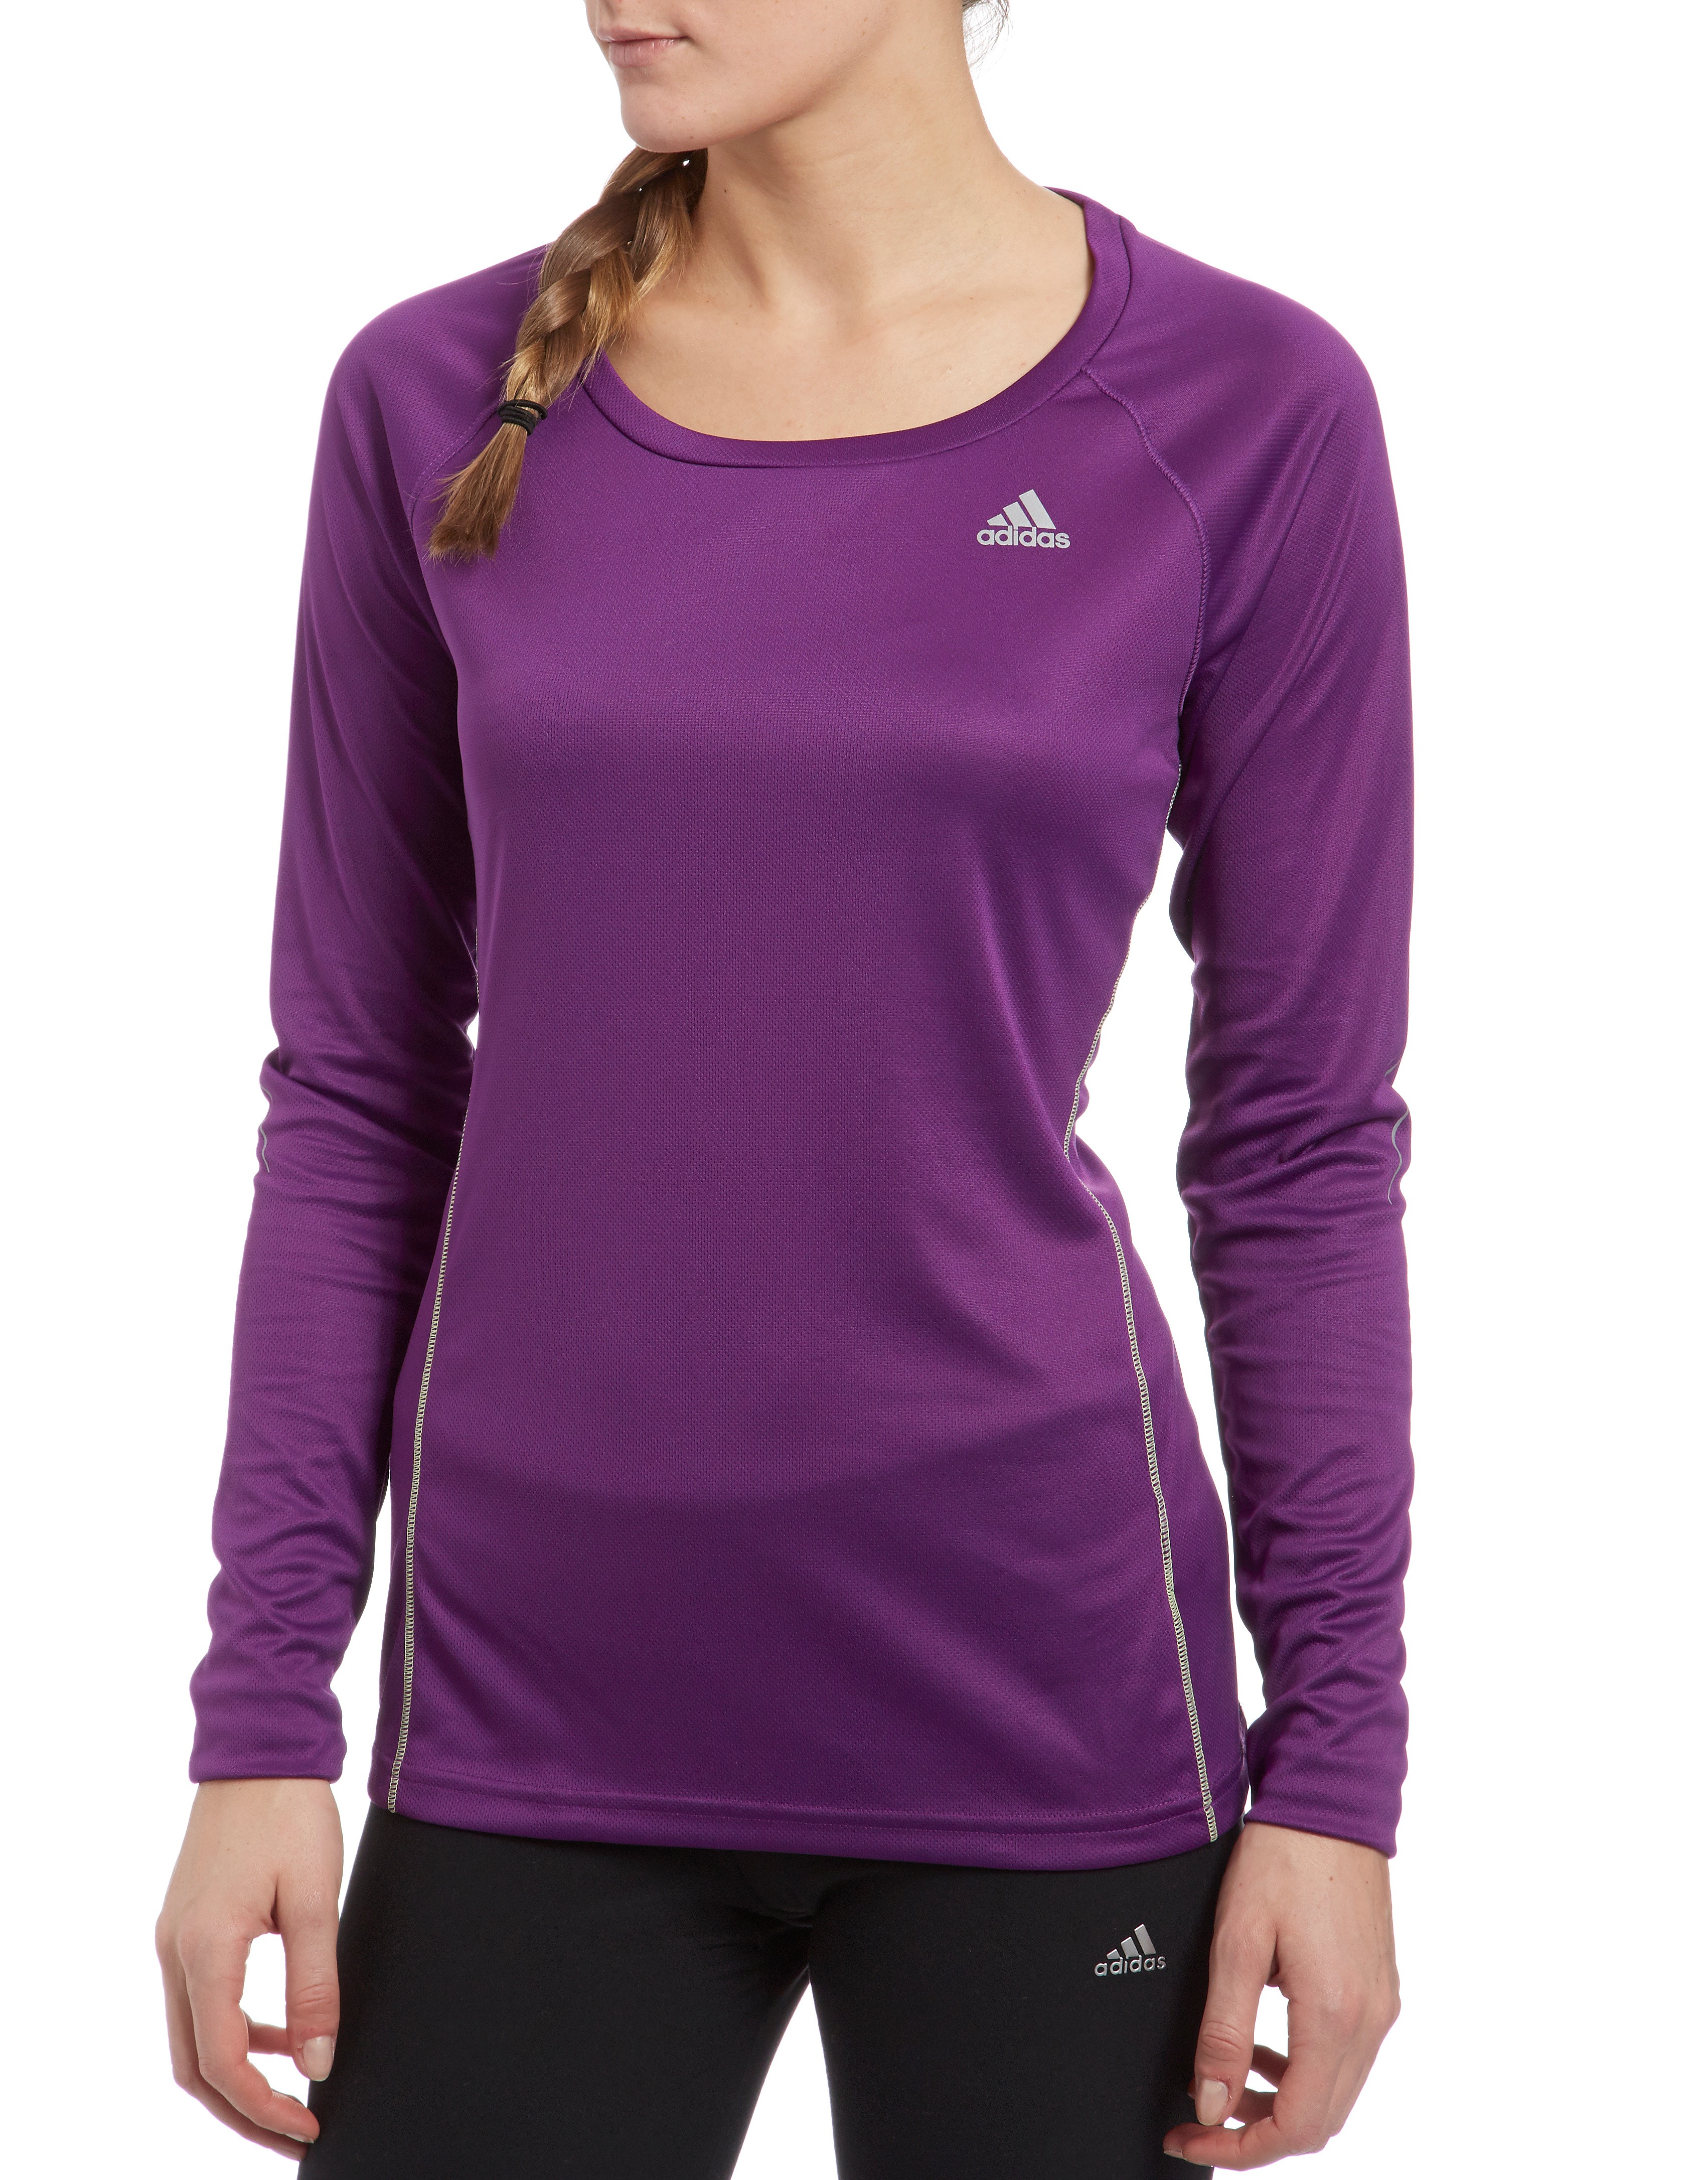 Sequentials Climacool Long Sleeve T-Shirt